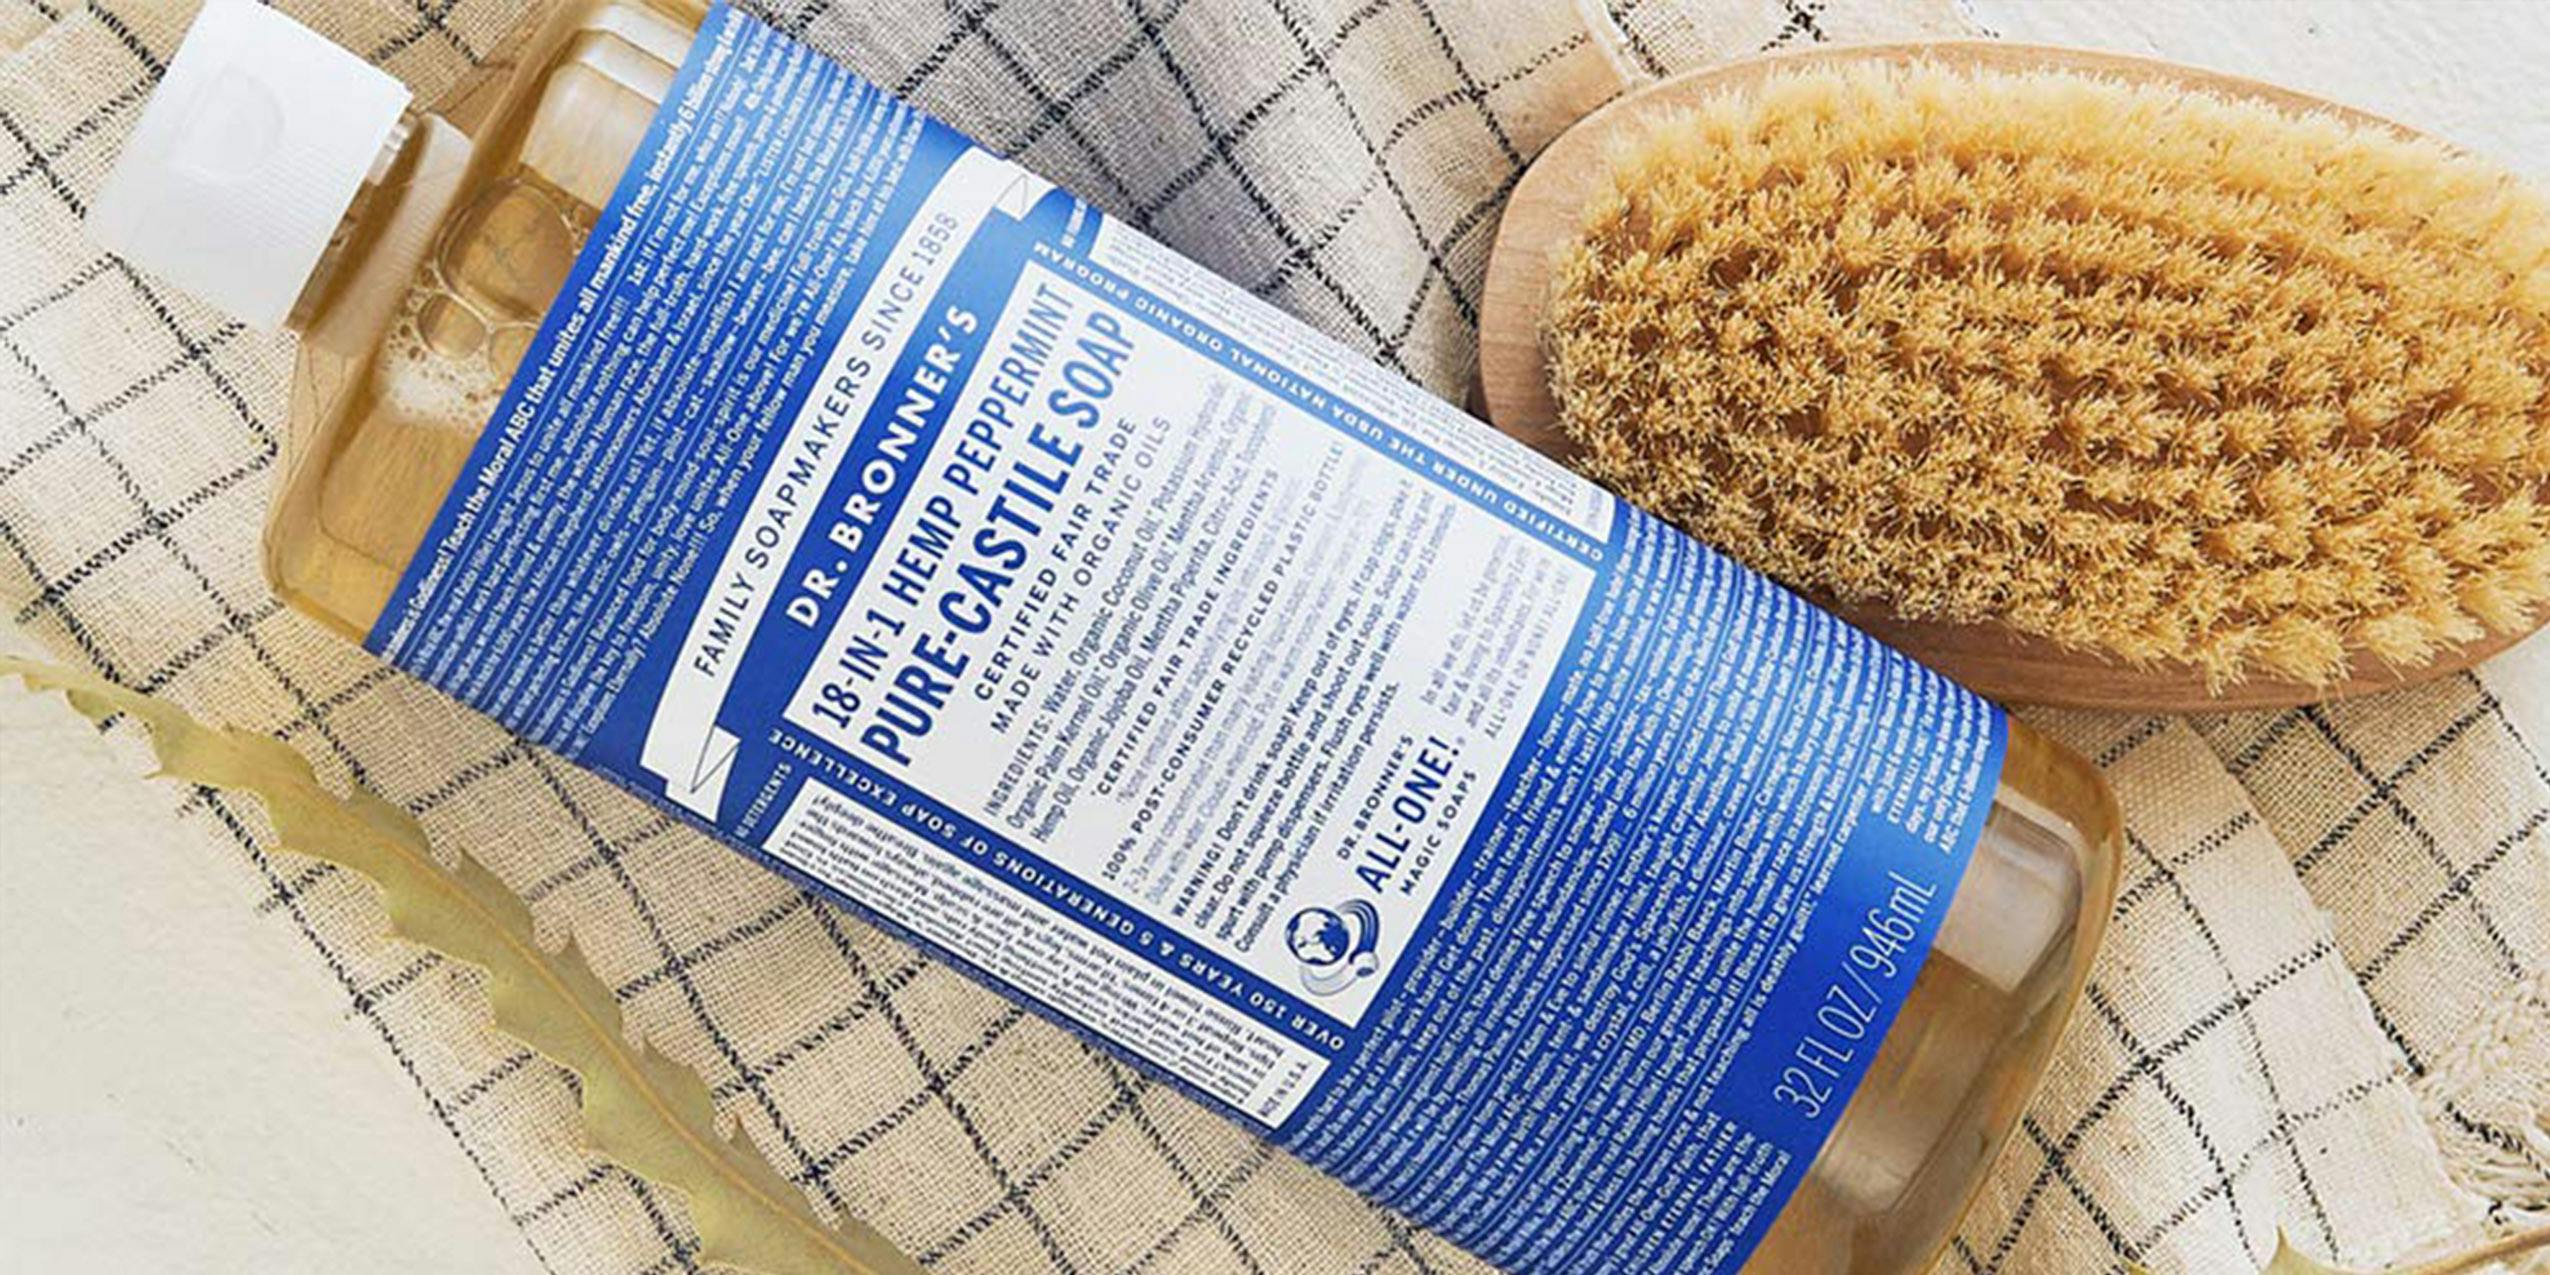 Dr. Bronners Pure Castile Soap with a brush.